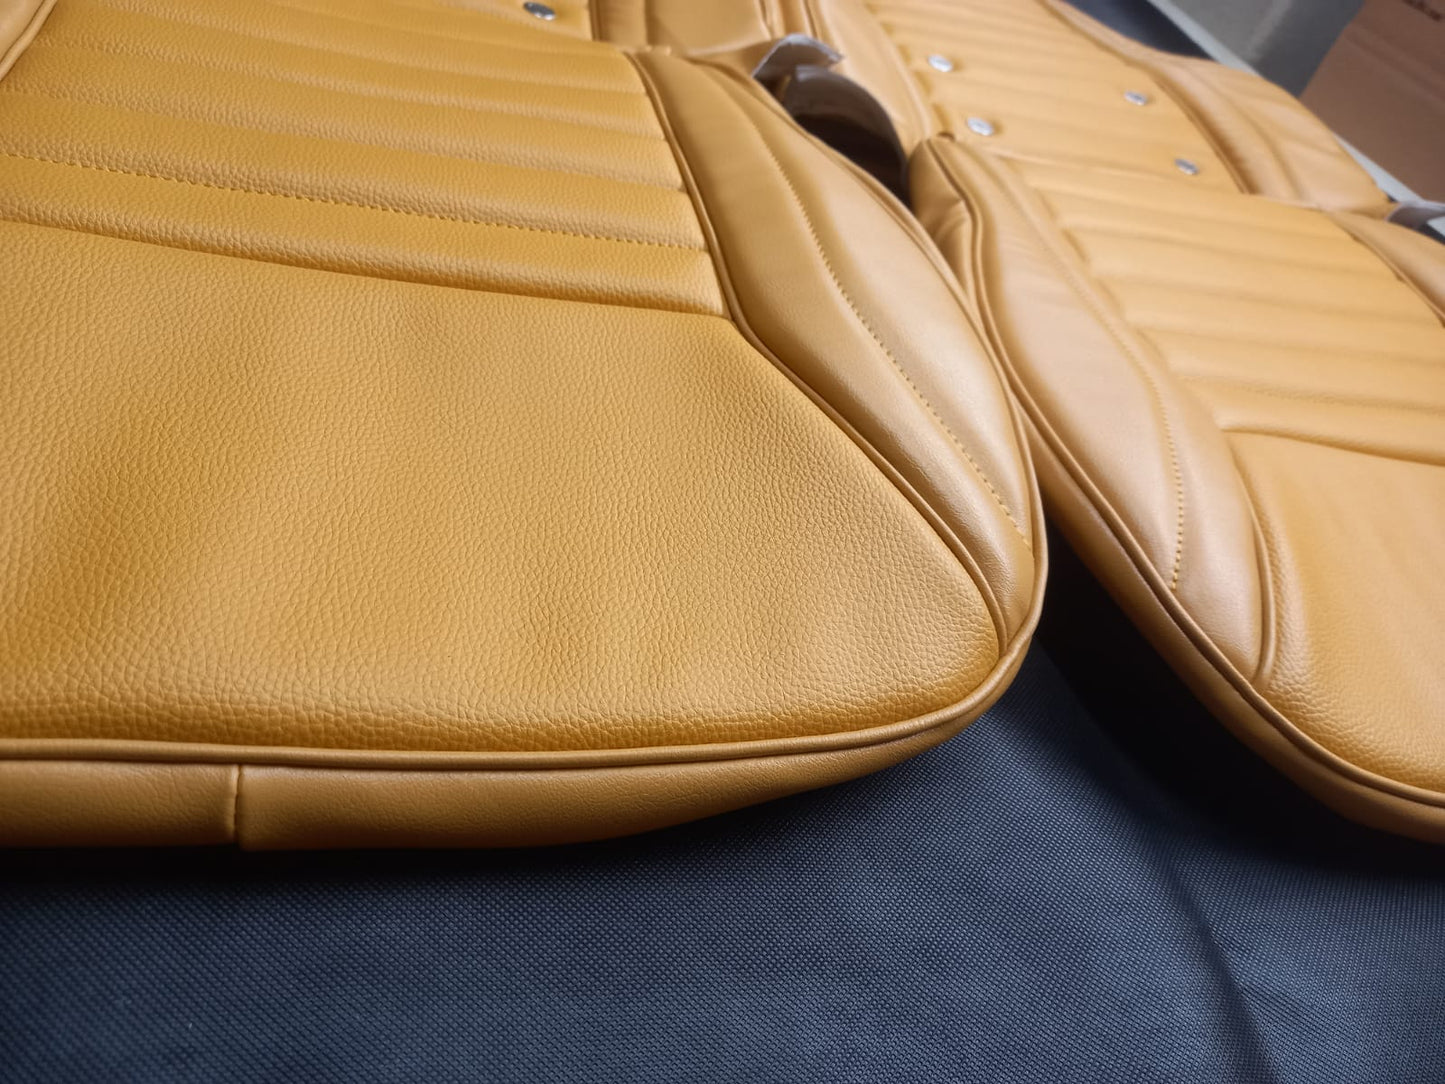 Datsun 240Z or 260Z or 280Z - (Year 1970 to 1978)  - Synthetic Leather - Seat Covers - Savannah Beige